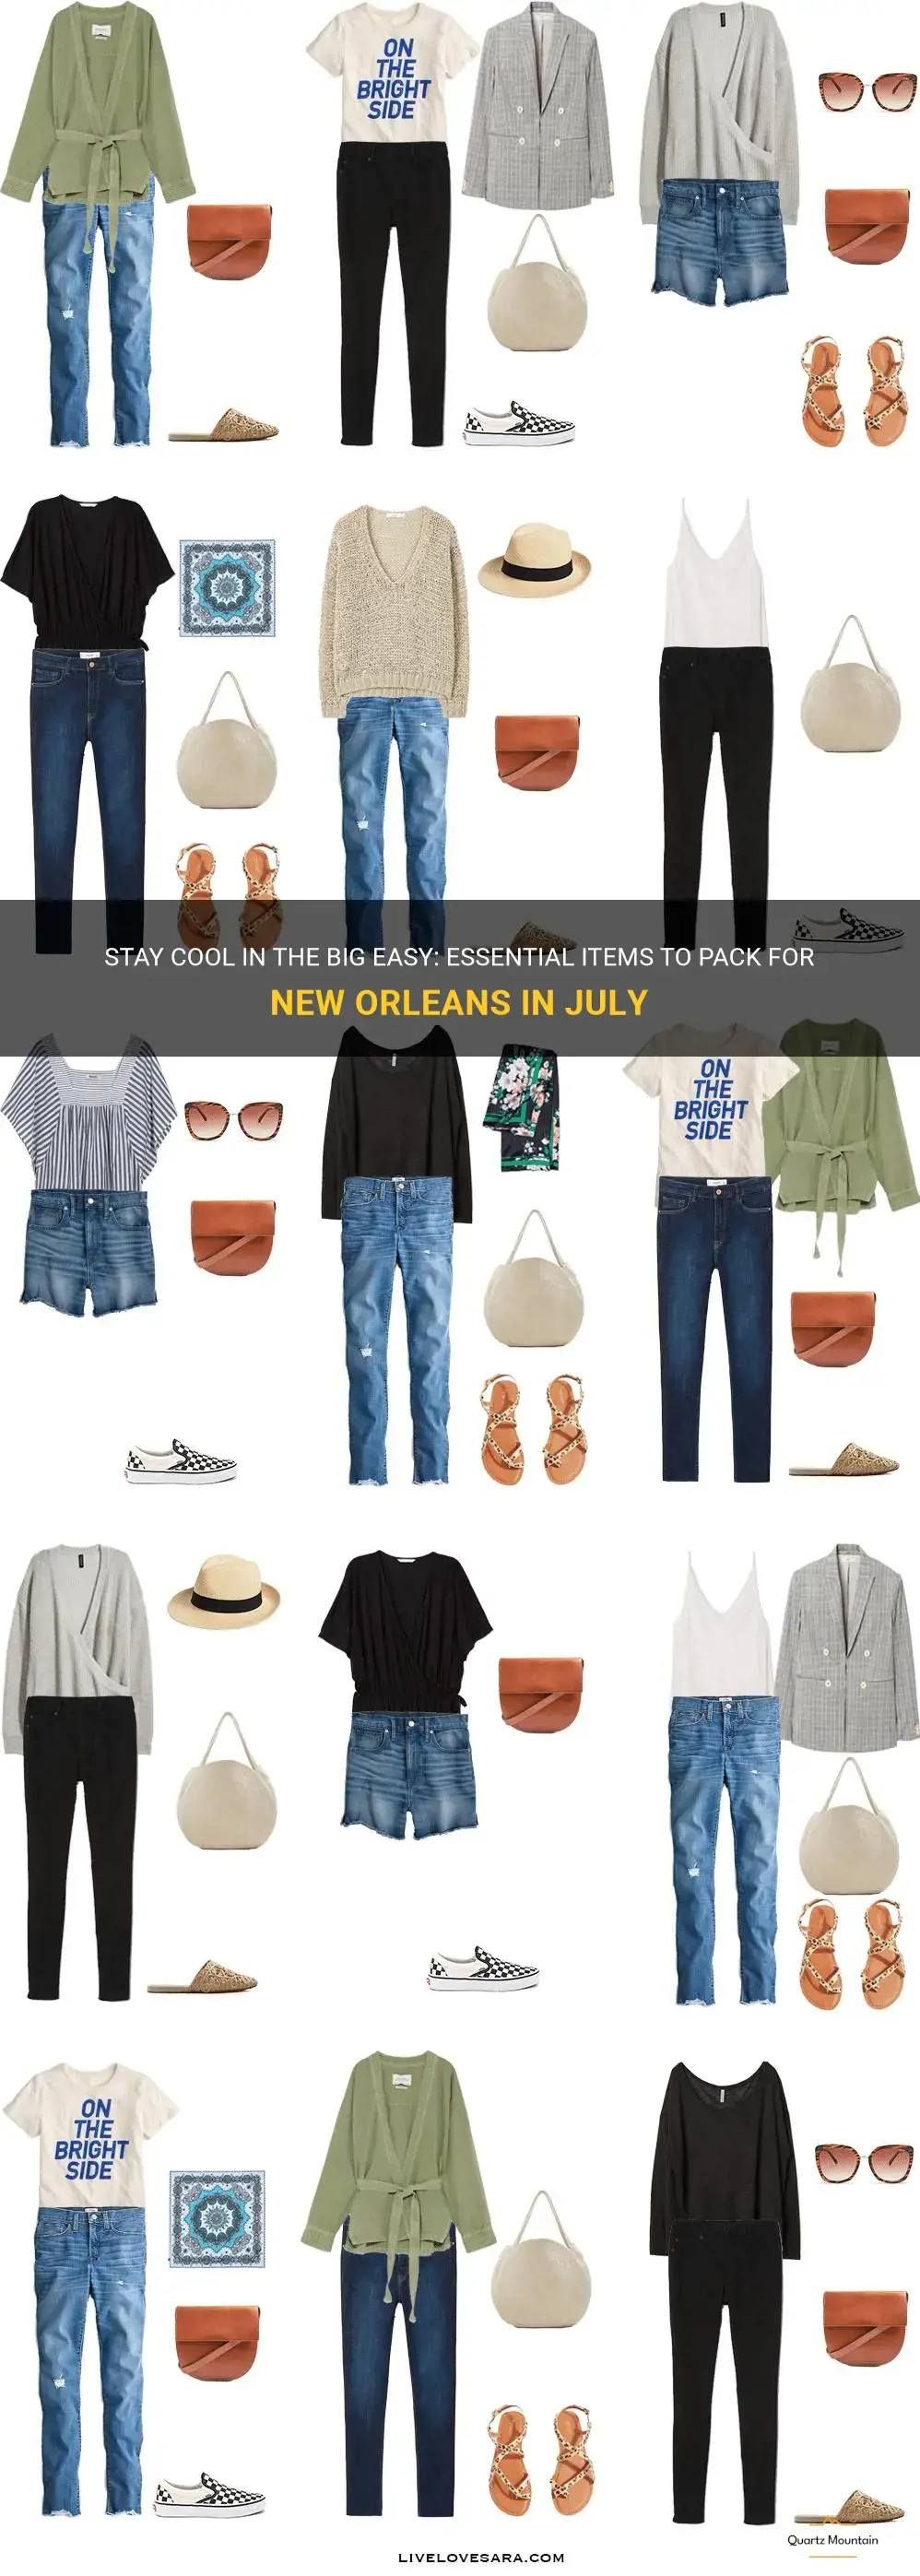 what to pack for new orleans in july